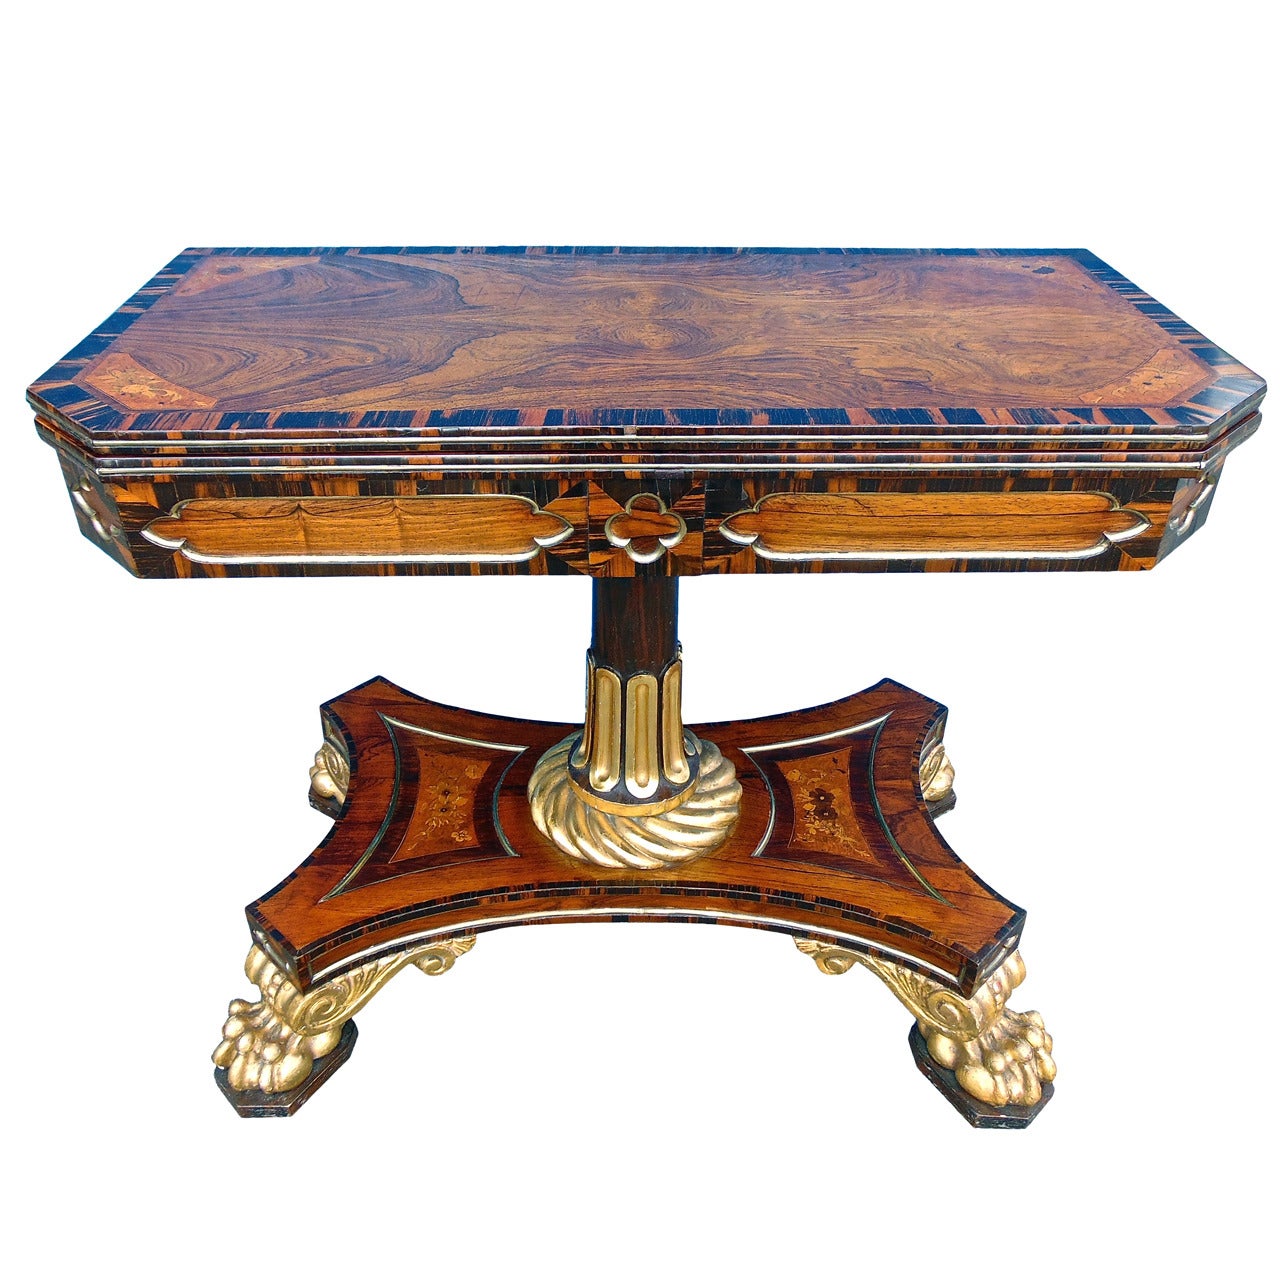 Period Regency Anglo Colonial Calamander Wood Games Table